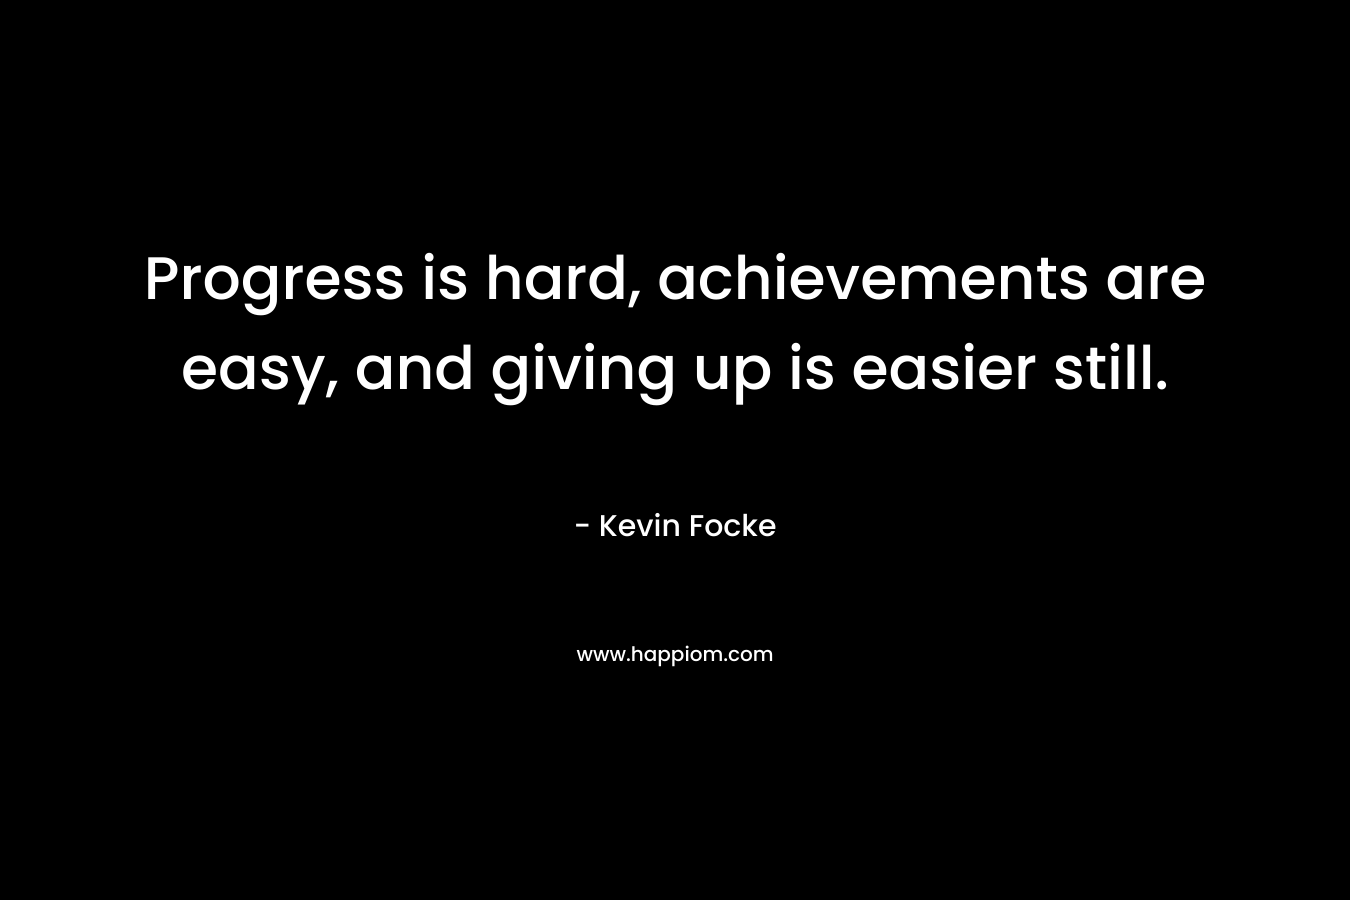 Progress is hard, achievements are easy, and giving up is easier still. – Kevin Focke